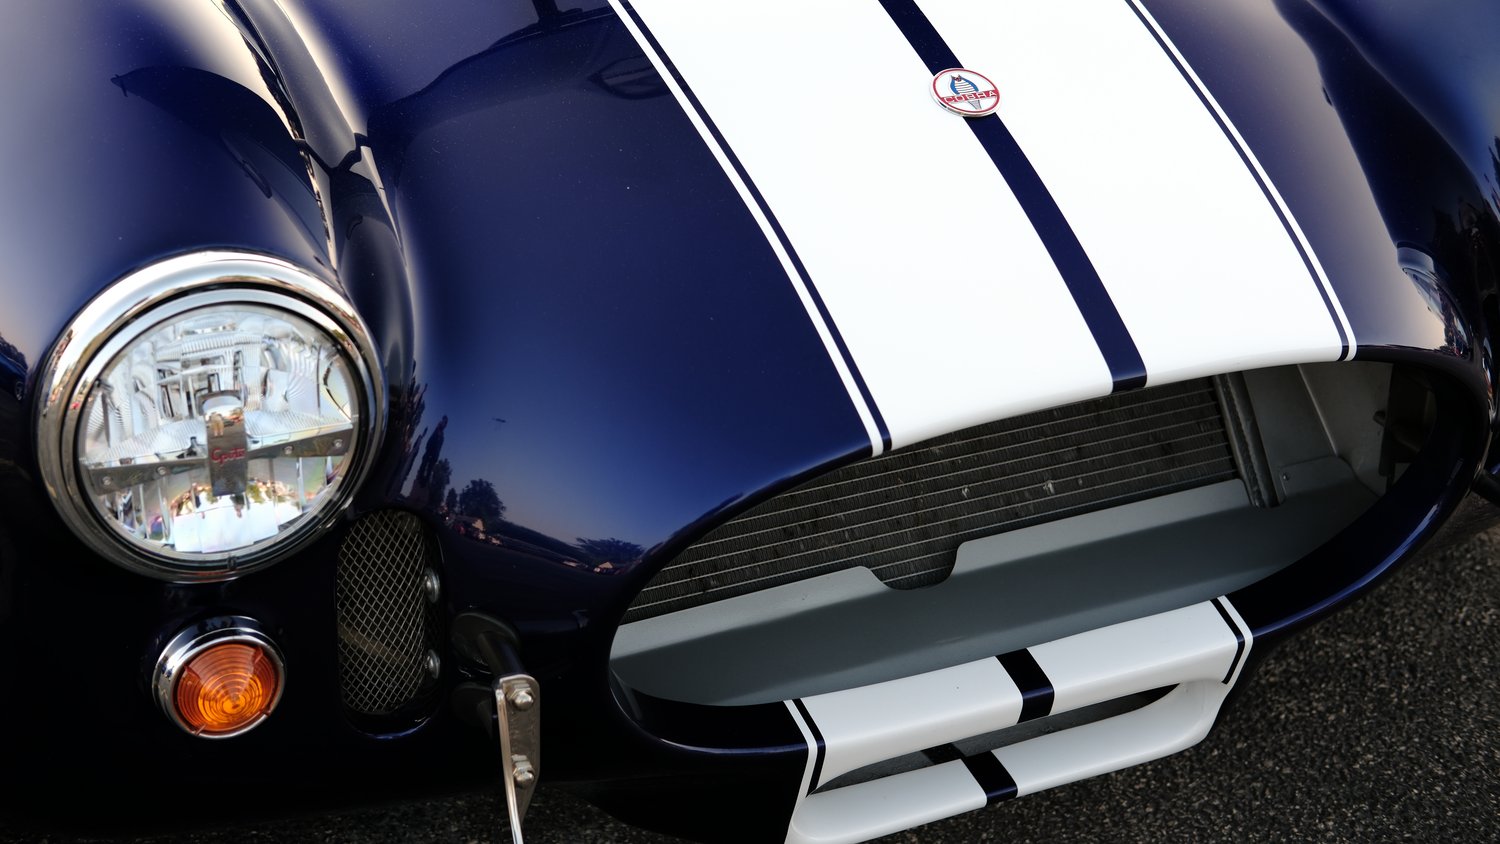 Shelby Cobra grille and hood.